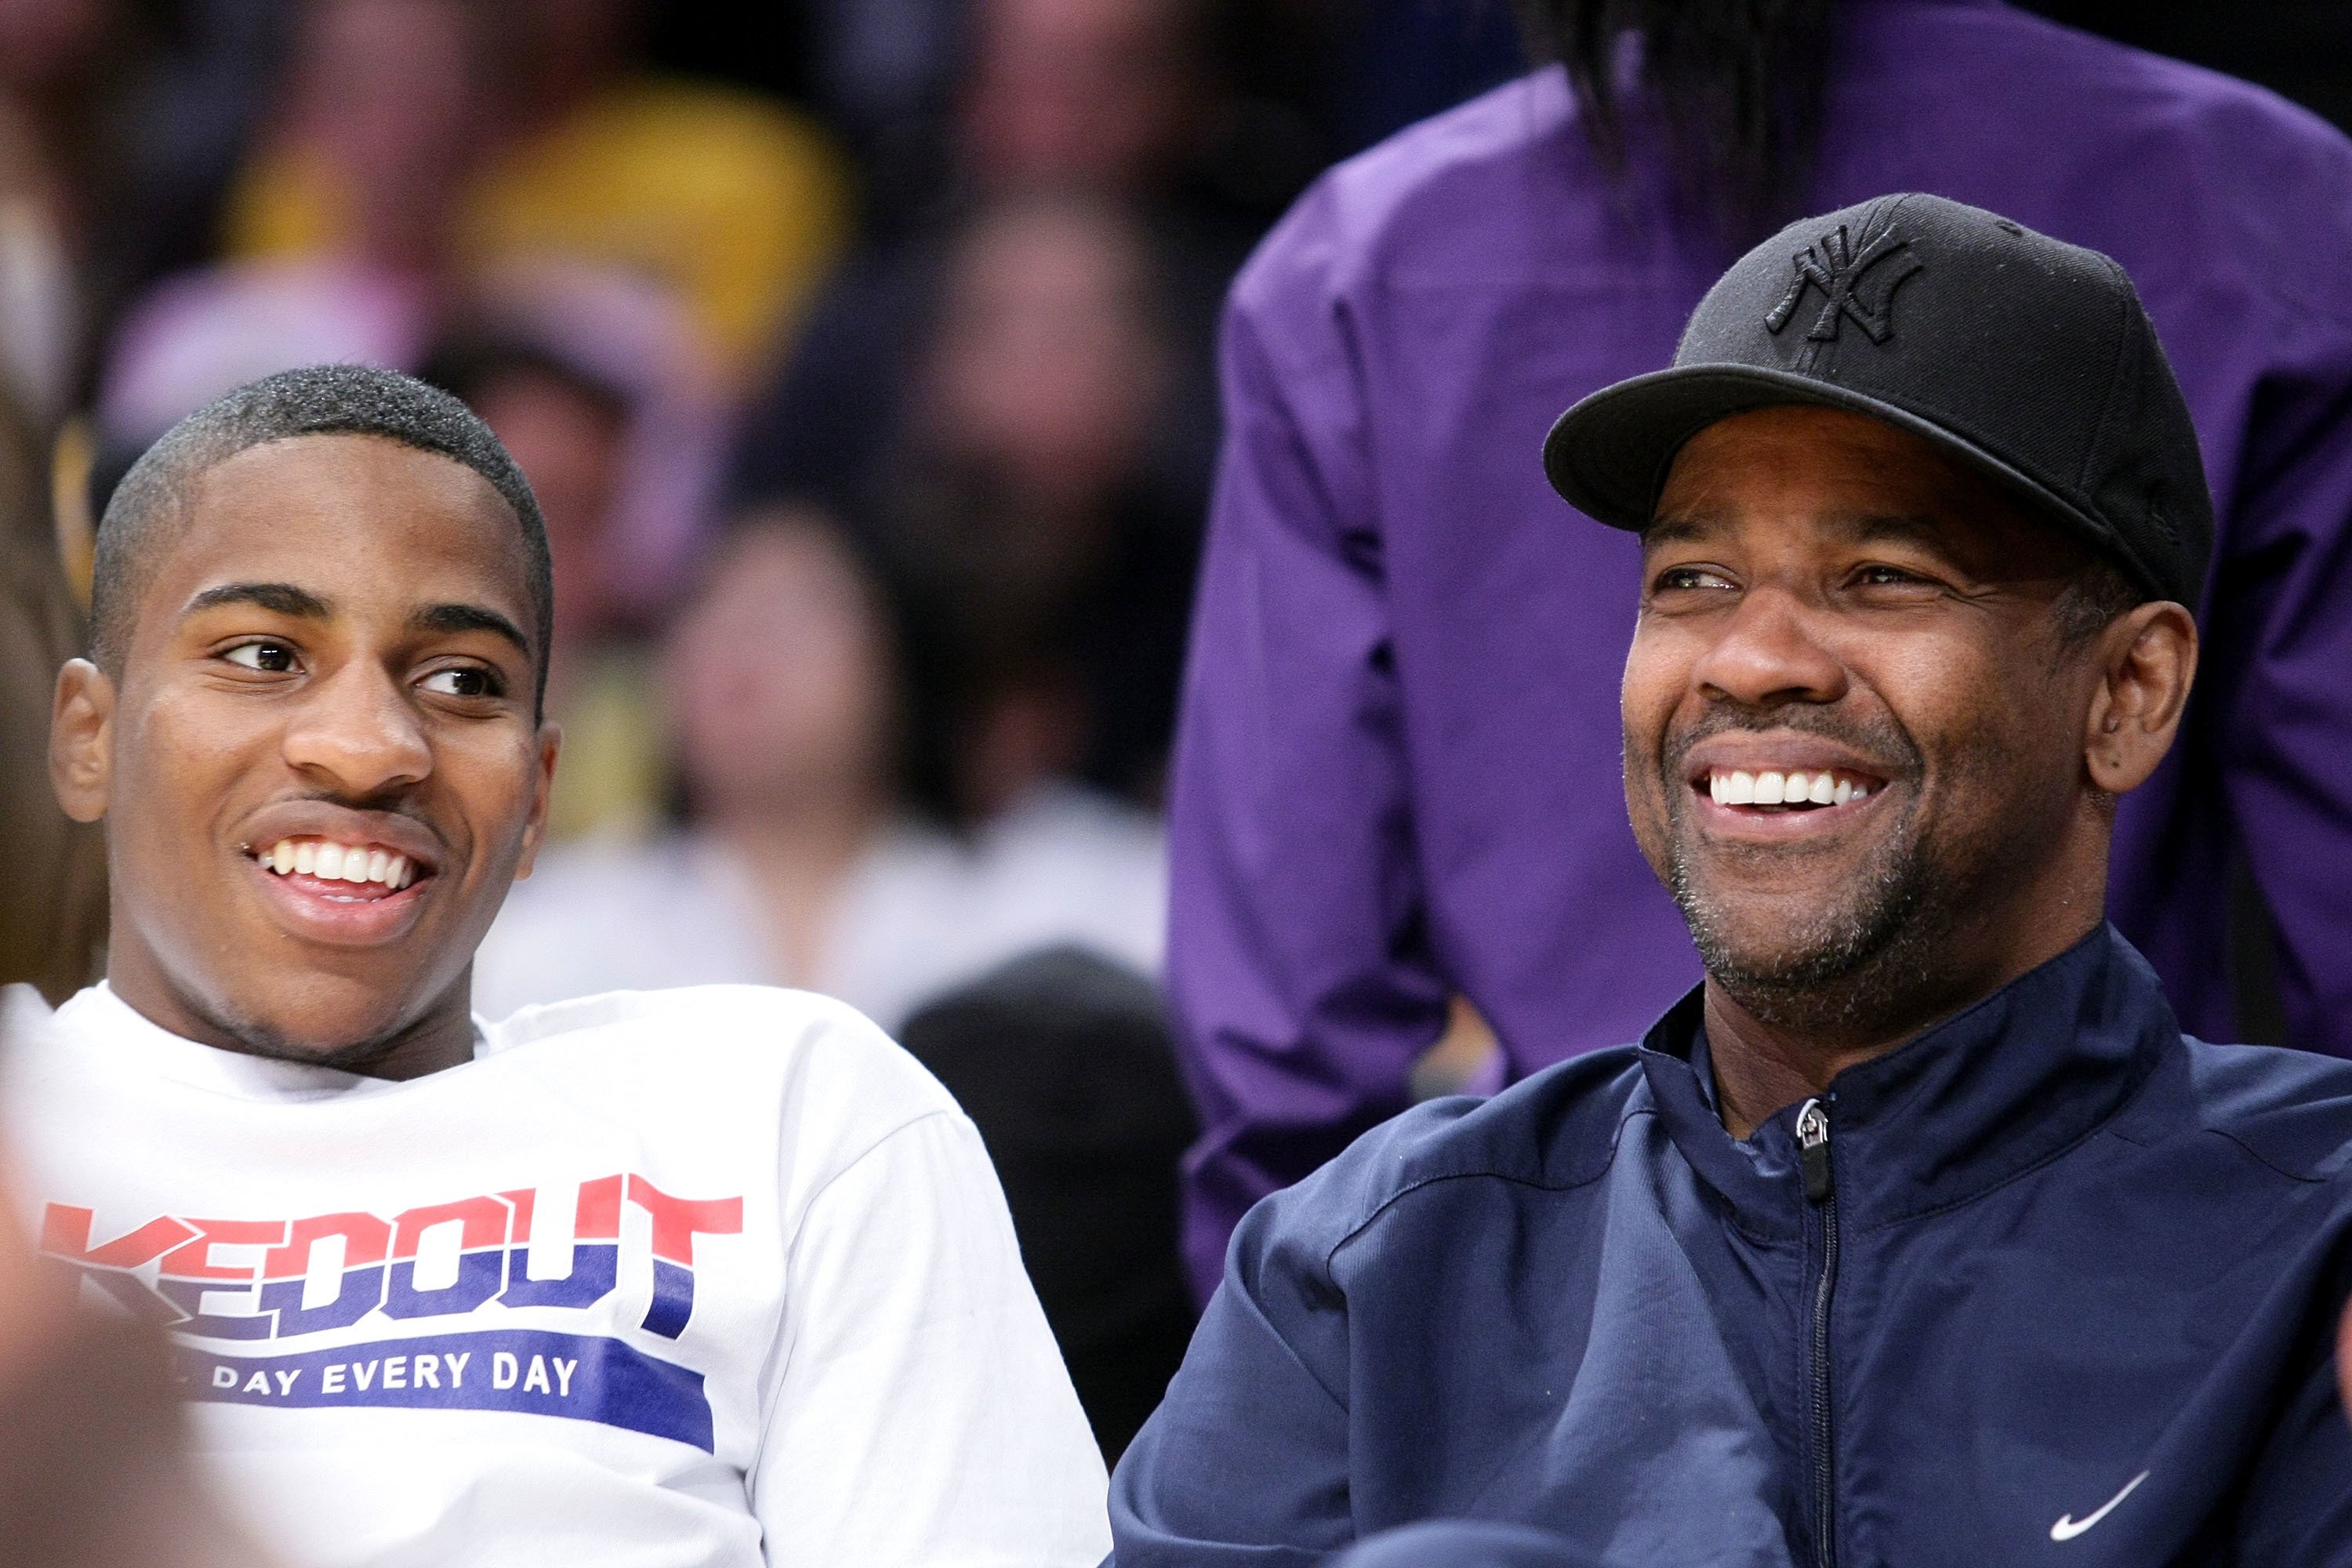 Denzel Washington and son Malcolm at a Los Angeles Lakers game at Staples Center in 2009 | Source: Getty Images